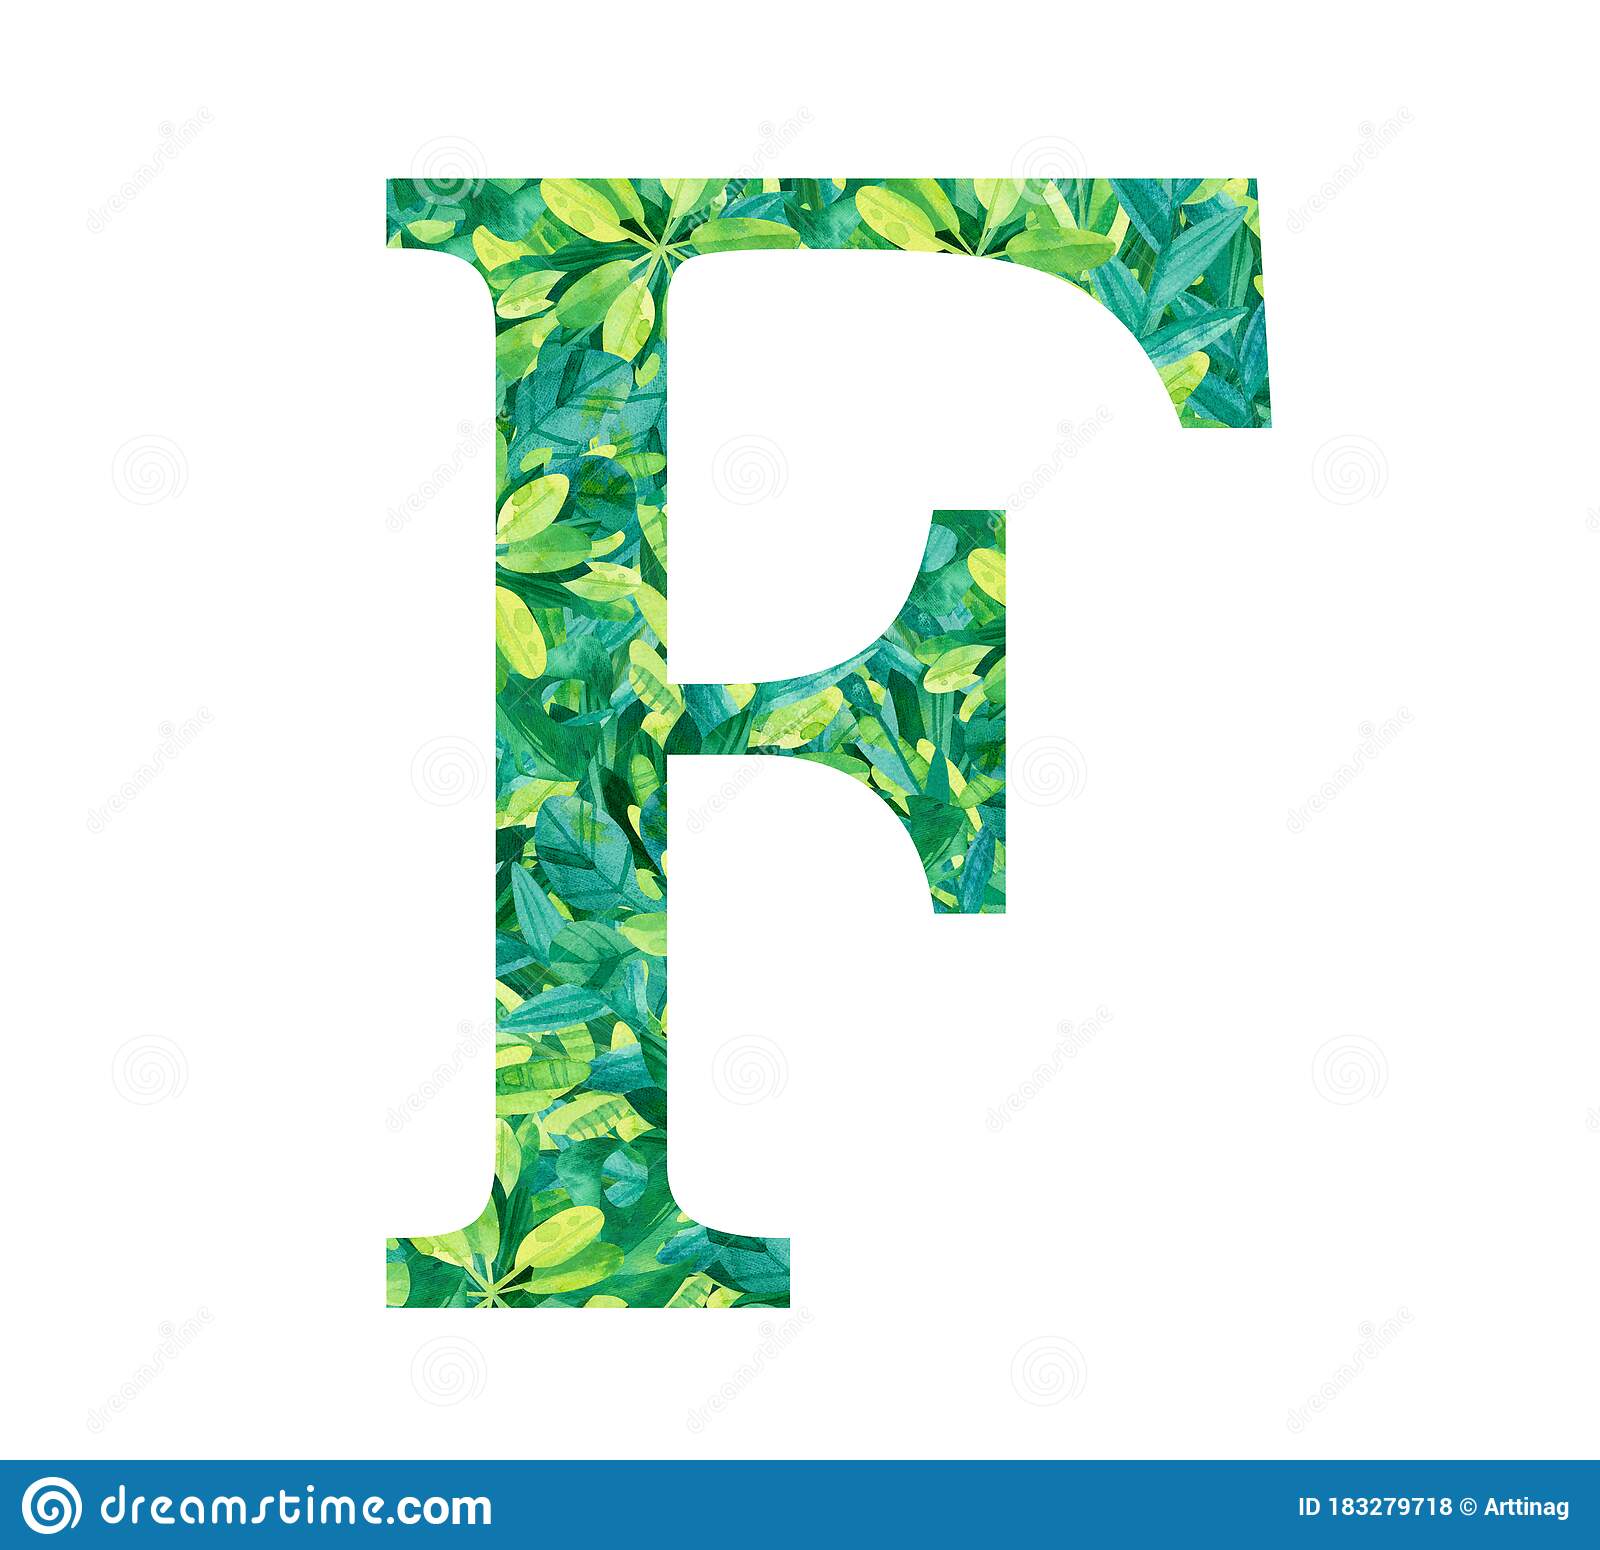 Detail Images Of The Letter F Nomer 49